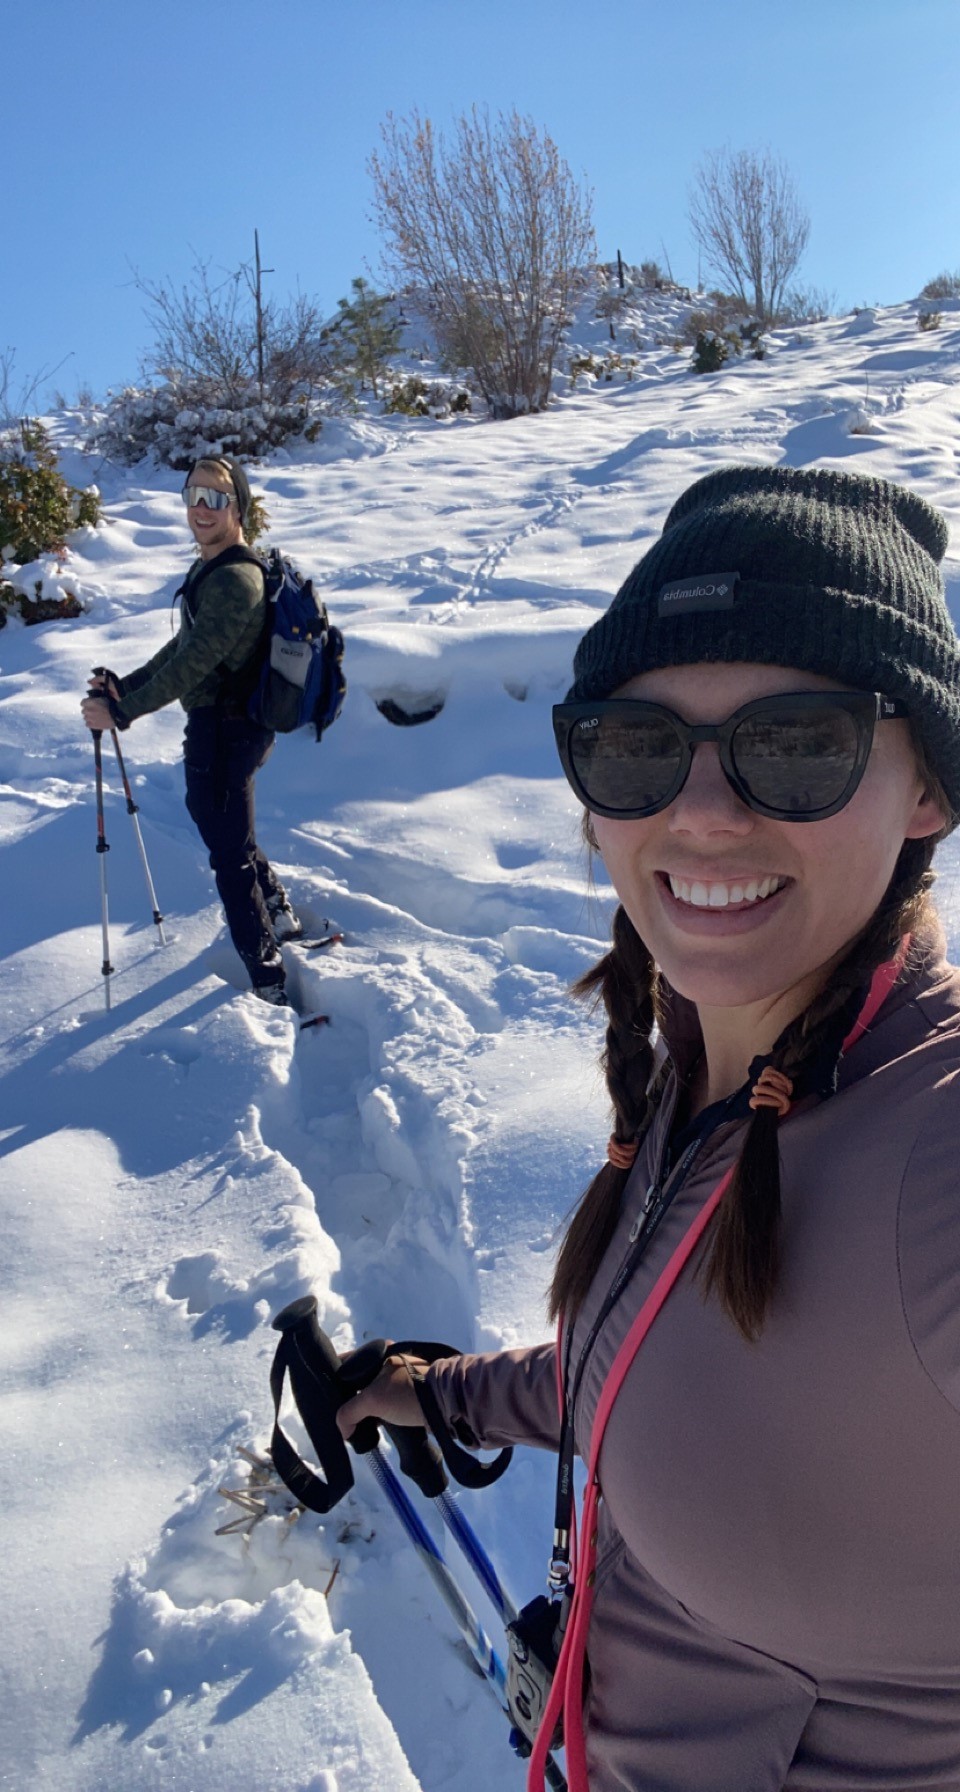 A person taking a selfie in the snow while snowshoeing, with another person in the background.